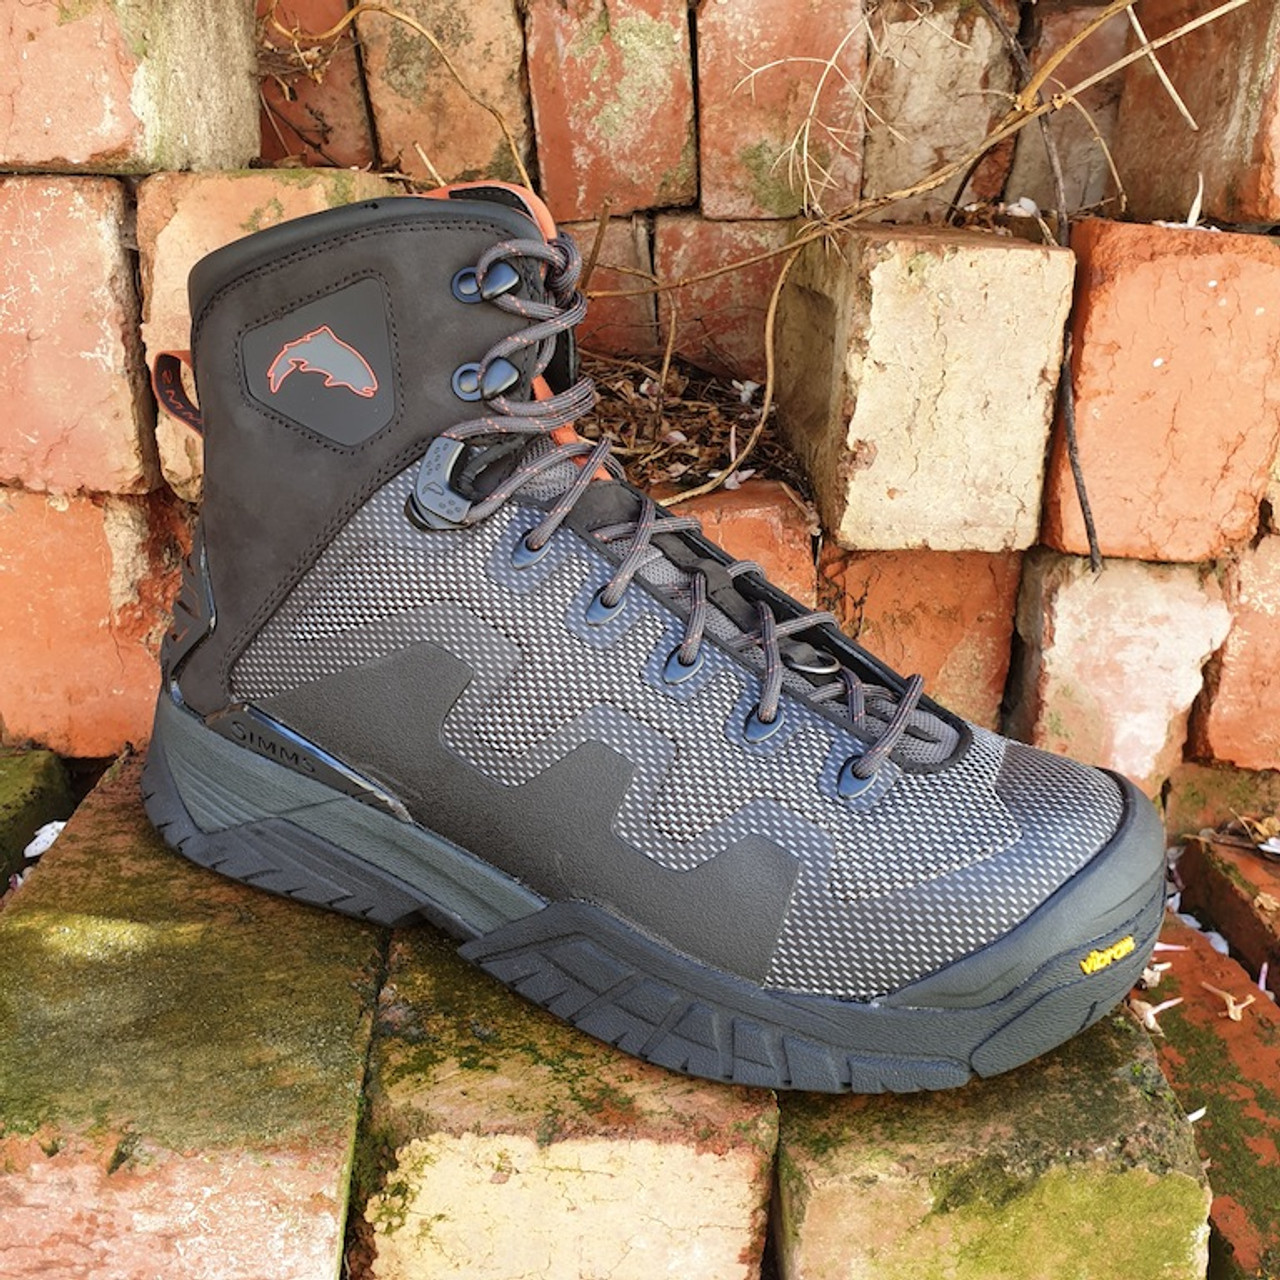 Simms G4 Pro wading boot - Armadale Angling